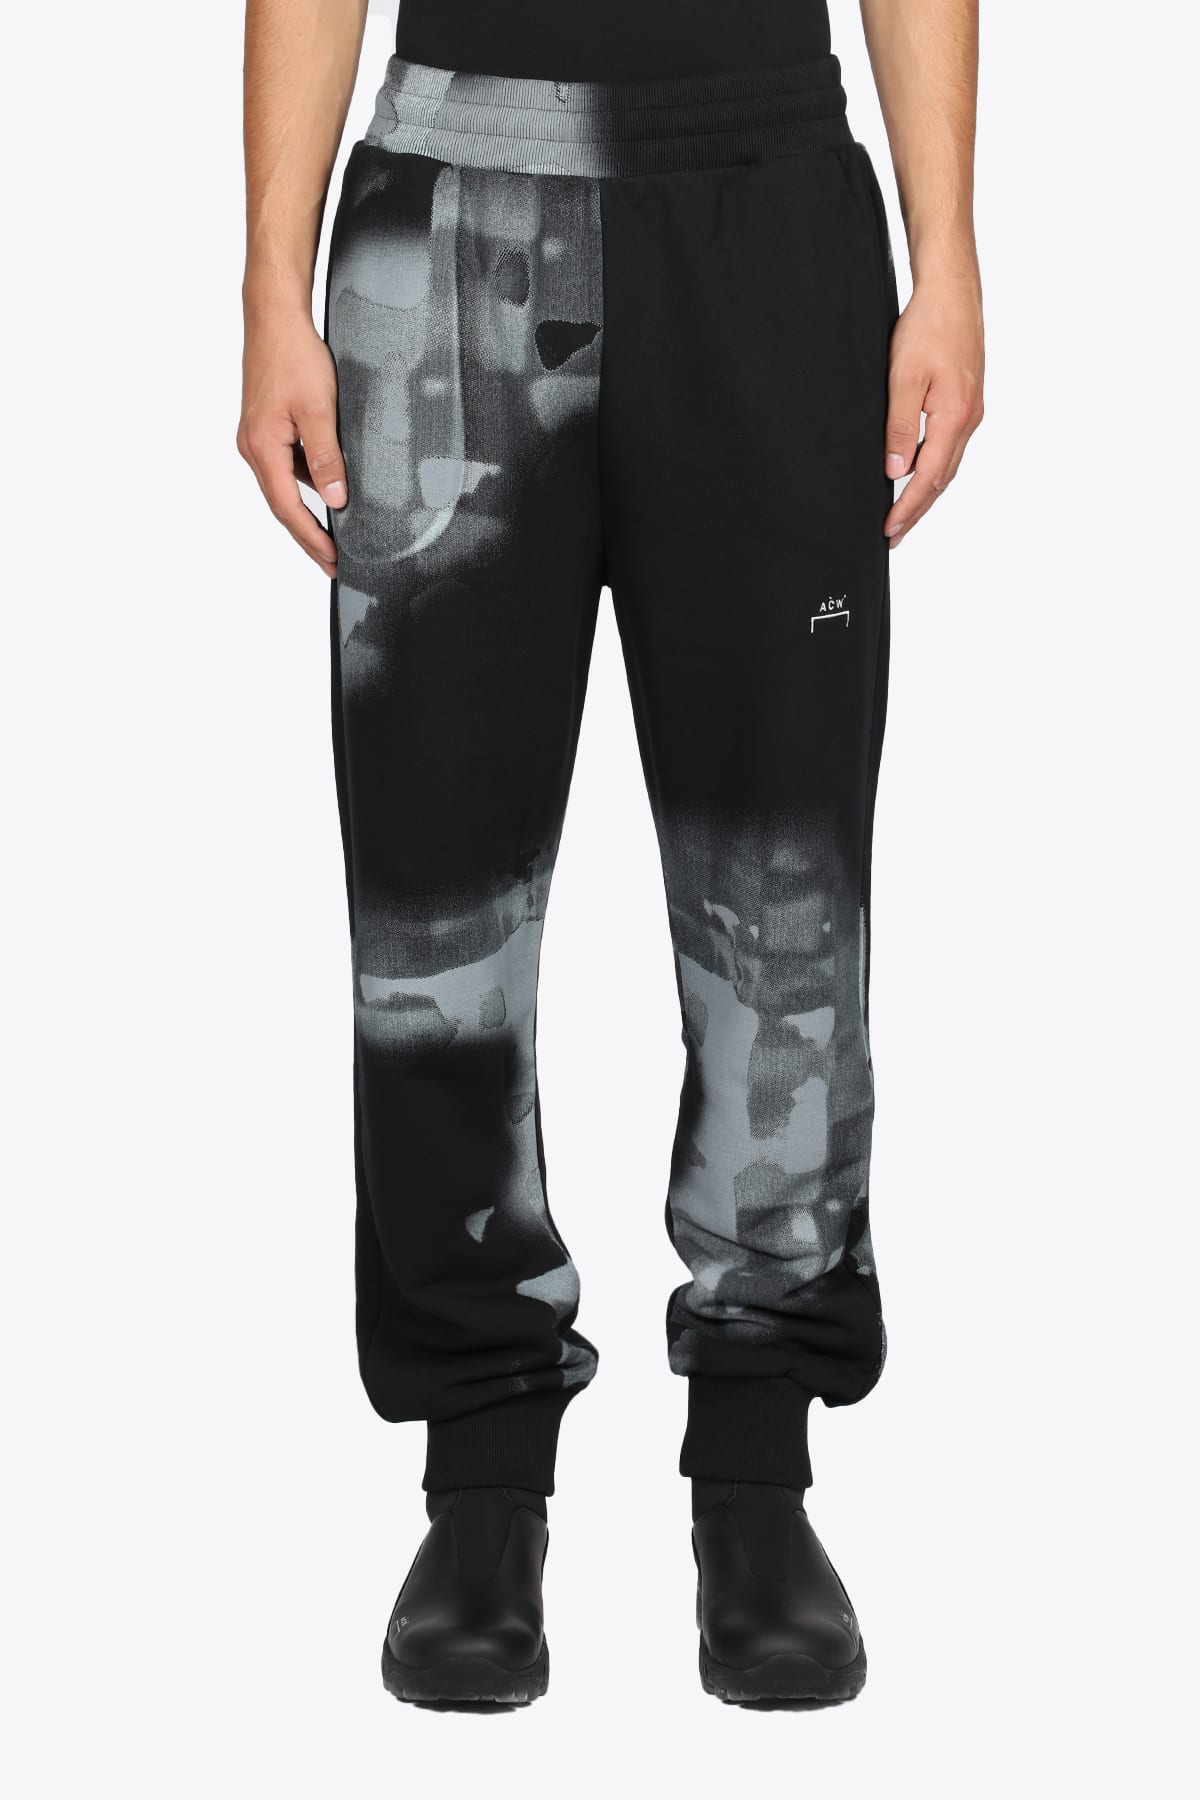 A-COLD-WALL Brush Stroke Sweatpants Black cotton sweatpant with abstract print